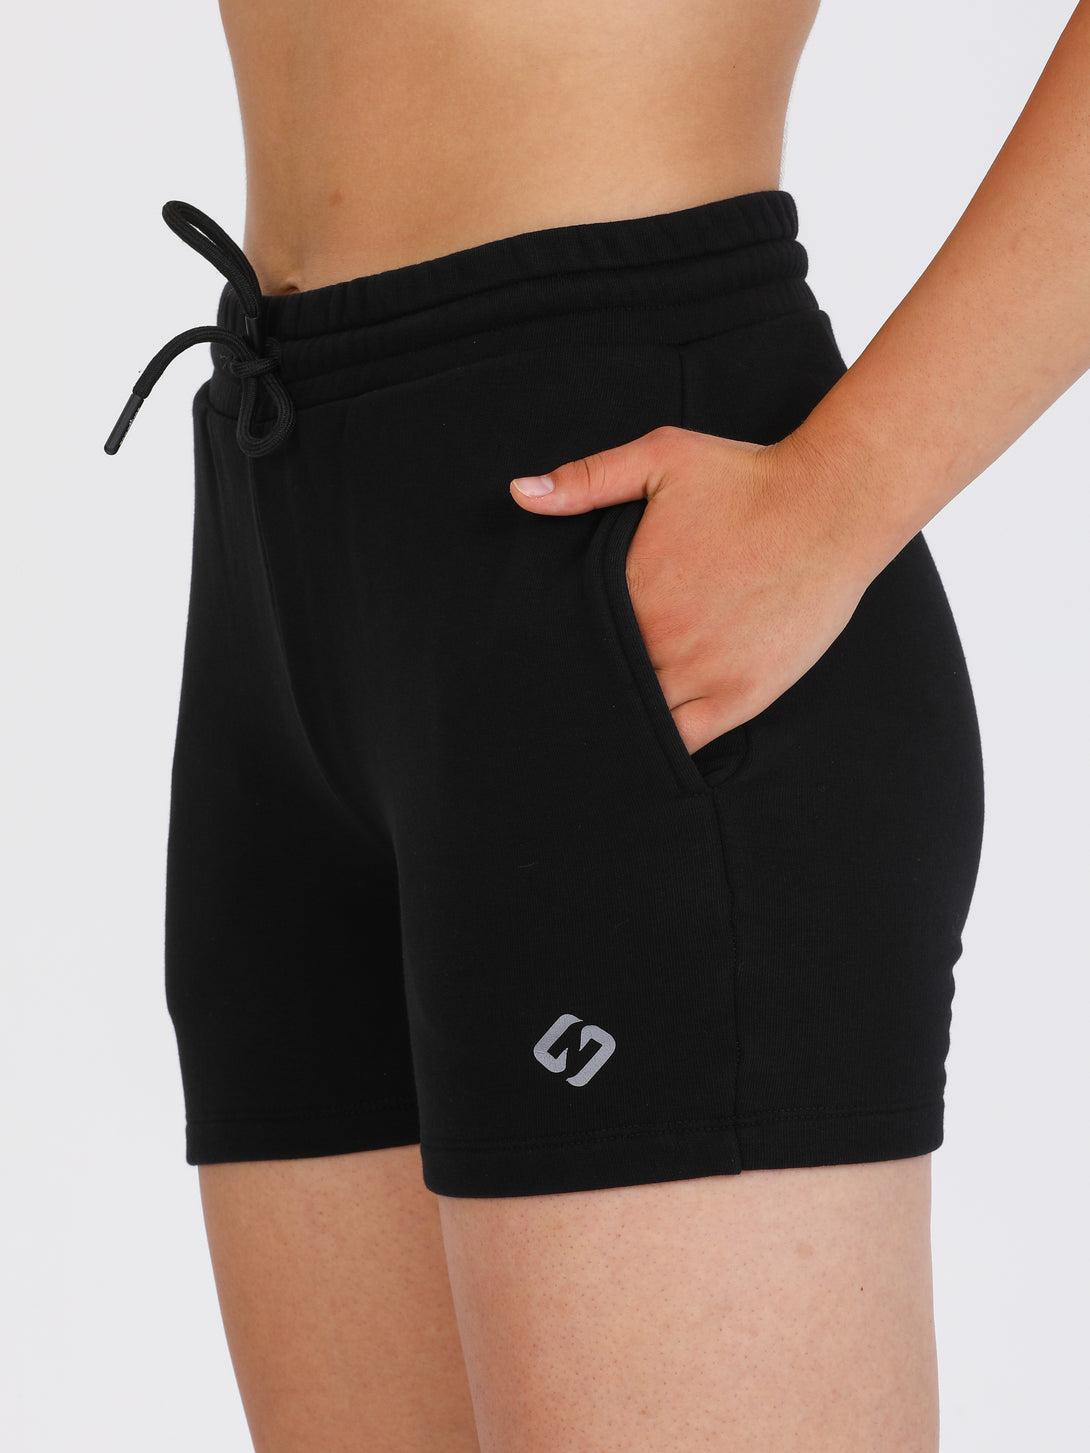 A Woman Wearing Black Color Essential Womens Workout Shorts